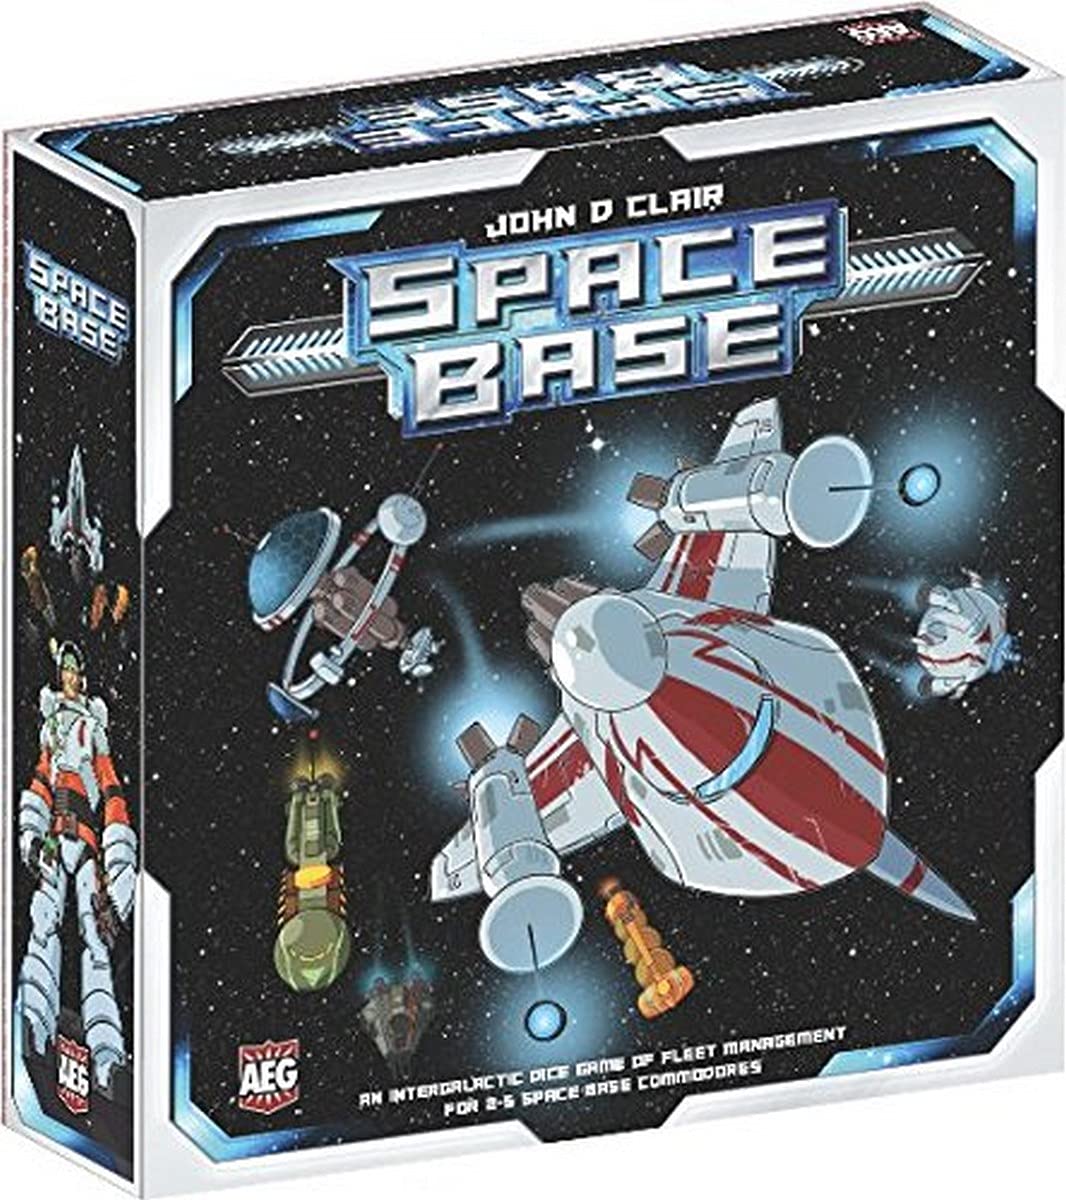 Alderac Entertainment Group (AEG) Space Base - Board Game, Dice Game, Build the Best Galactic Port, Heavy Interaction, 2 to 5 Players, 60 Minute Play Time, for Ages 14 and Up